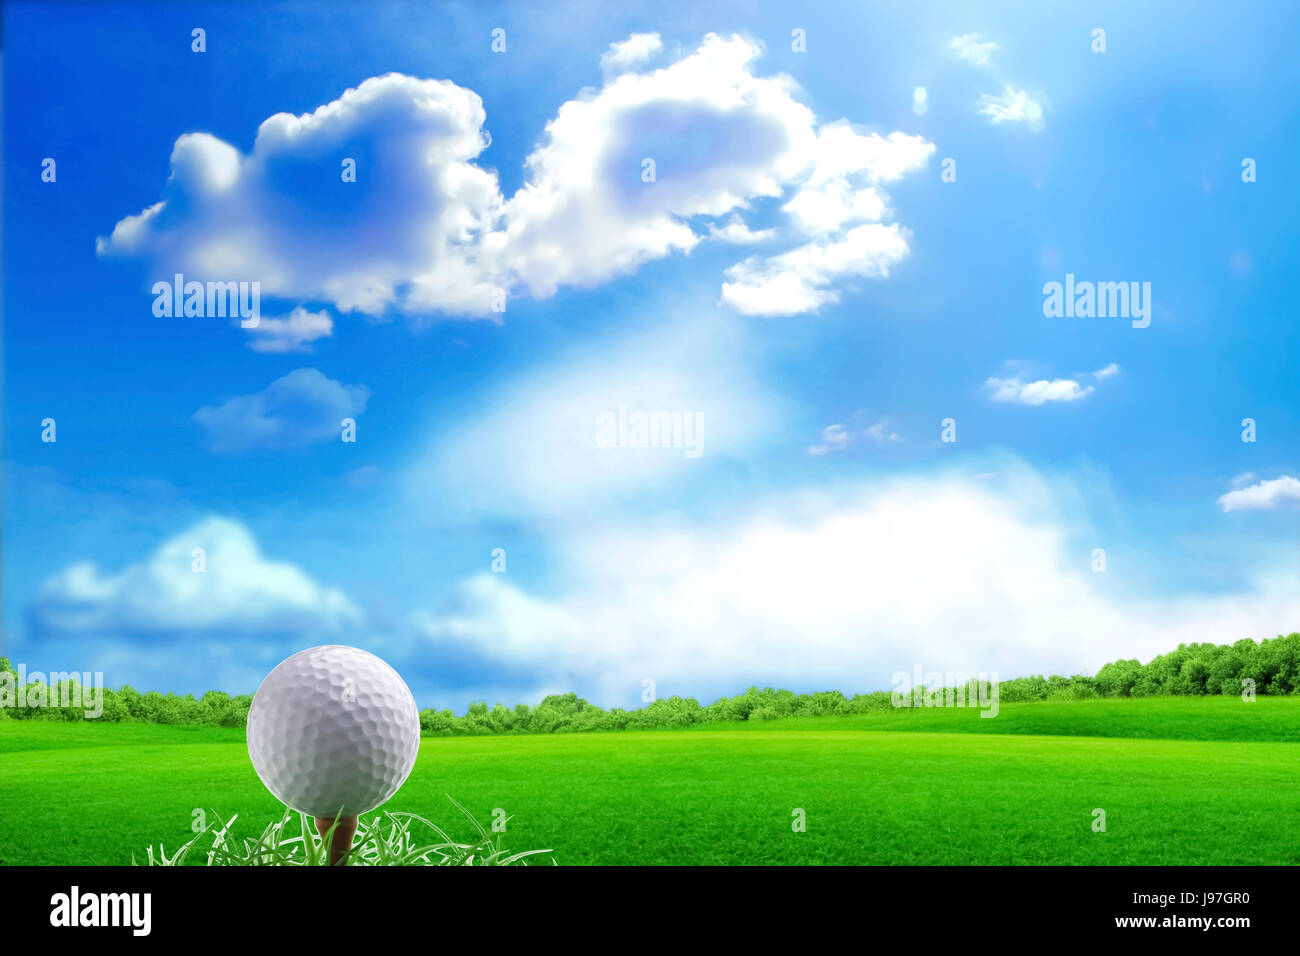 Golf ball and tee on green grass, beautiful bright blue sky Stock Photo